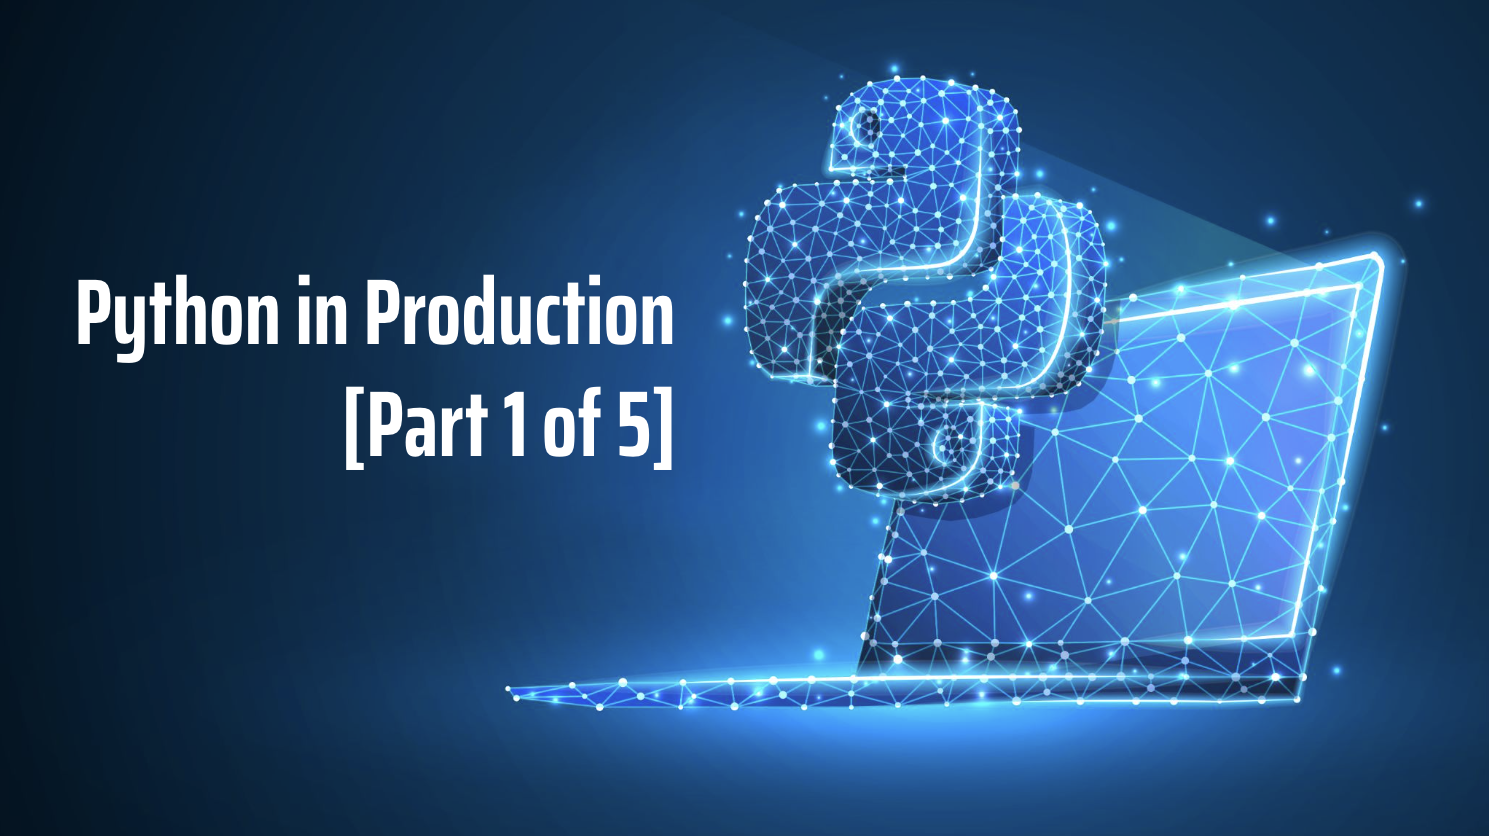 Python in Production (Part 1 of 5)